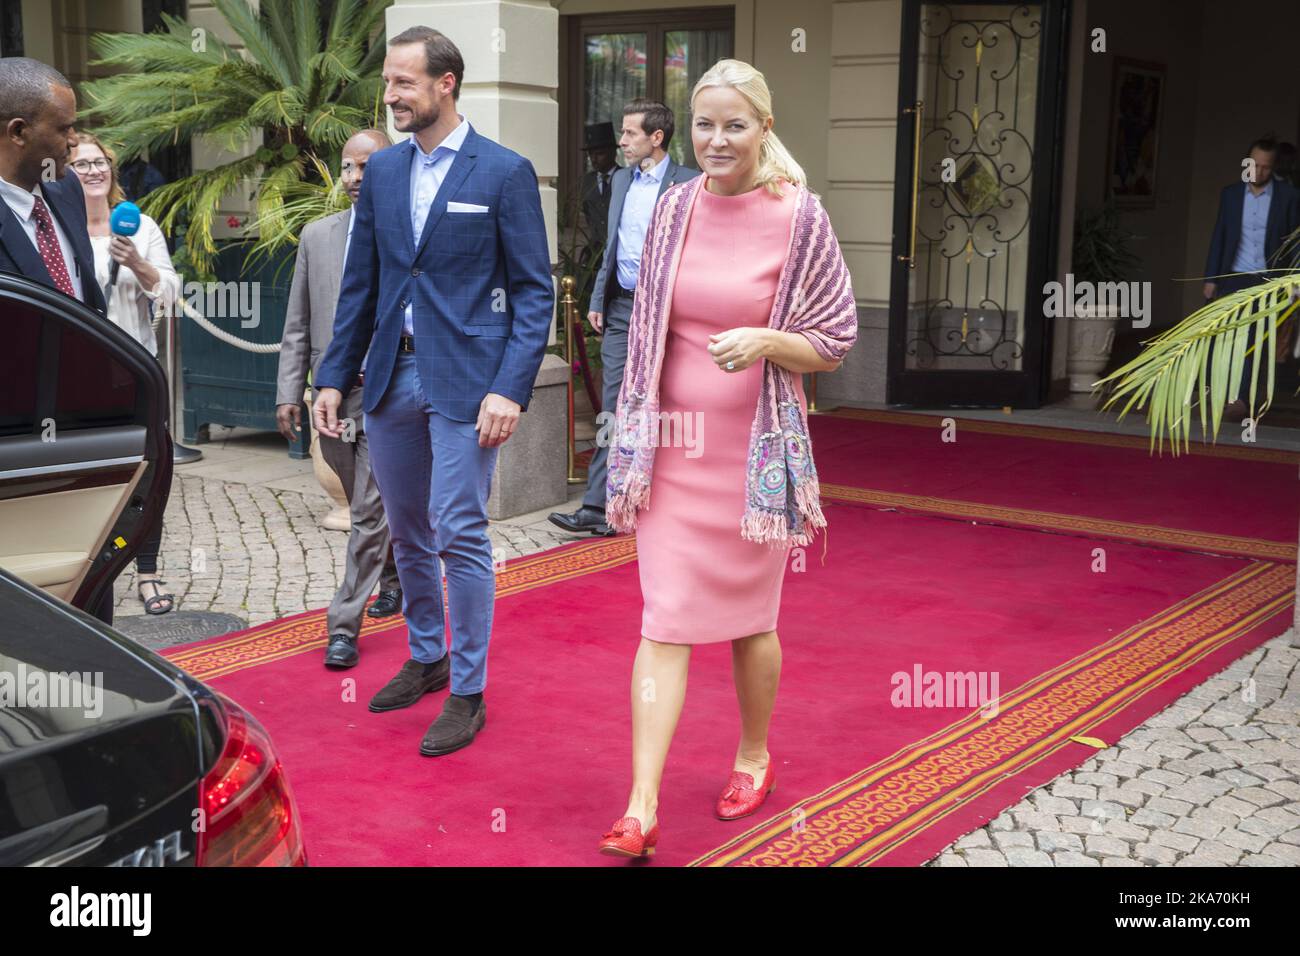 Addis Ababa, Ethiopia 20171106. Their Royal Highnesses The Crown Prince of Norway and Crown Princess visit Ethiopia 7 - 9 November 2017. Crown Prince Haakon and Crown Princess Mette-Marit with red shoes come out of Sheraton hotel in Addis Ababa. Photo: Vidar Ruud / NTB scanpi Stock Photo